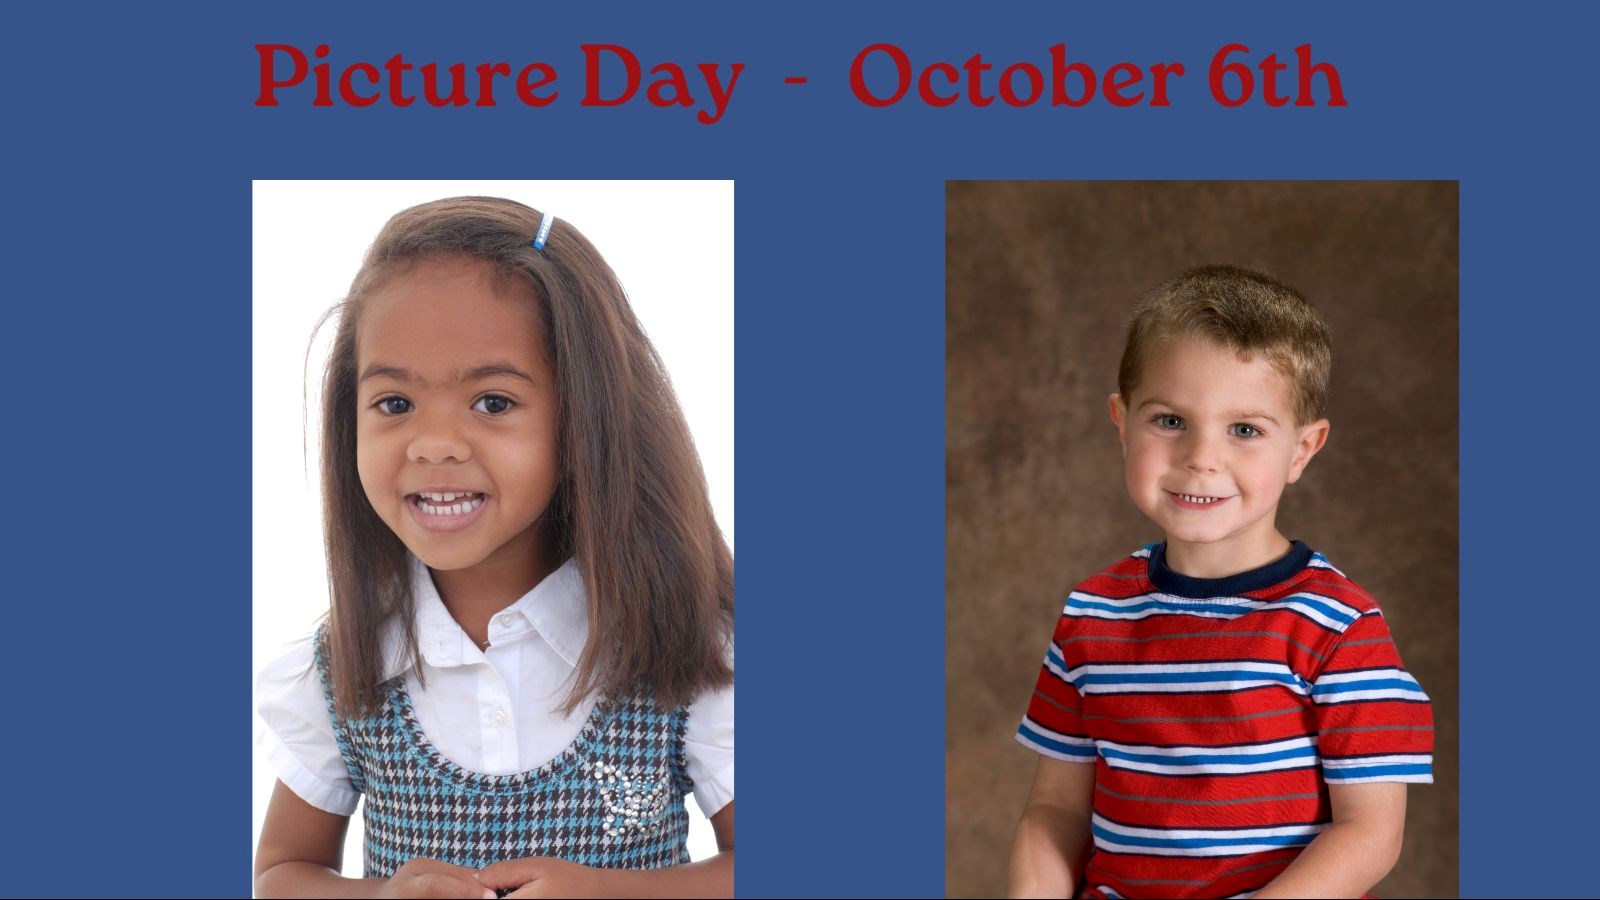 Black girl and white boy posing for school picture on blue background